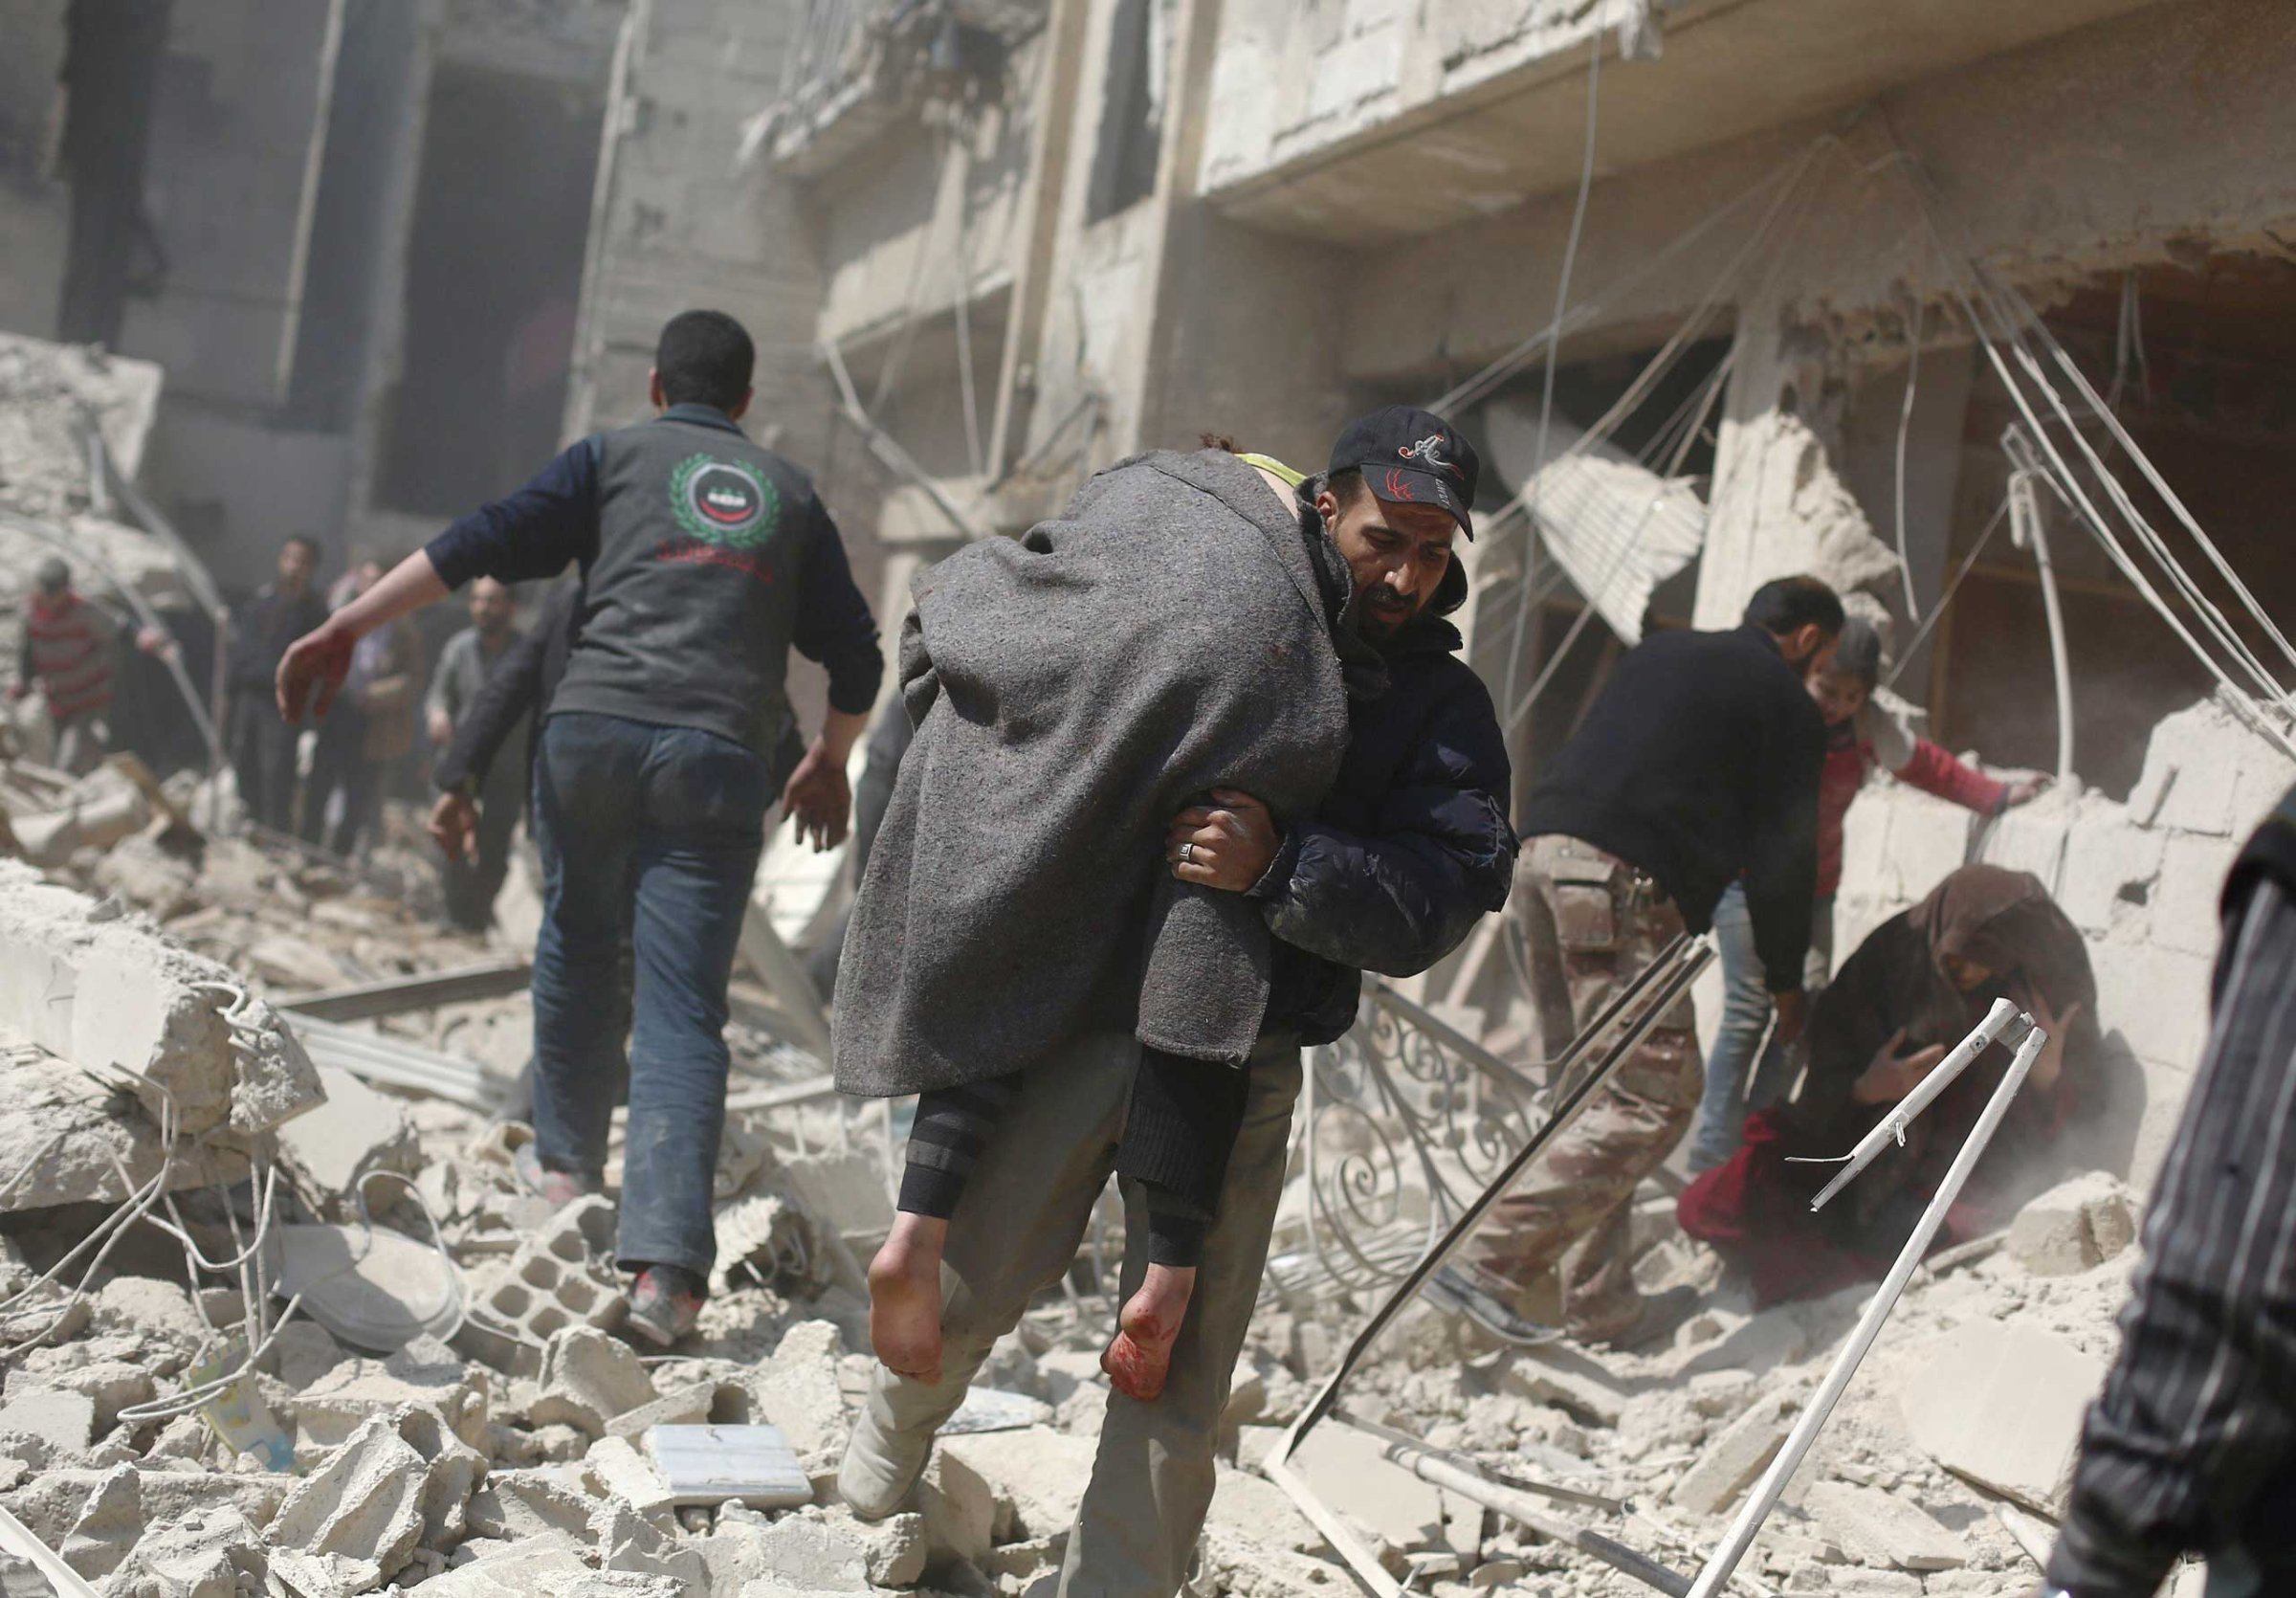 A man carries a wounded person in the rebel-held area of Douma, east of the Syrian capital Damascus, following reported air strikes by regime forces on March 15, 2015.